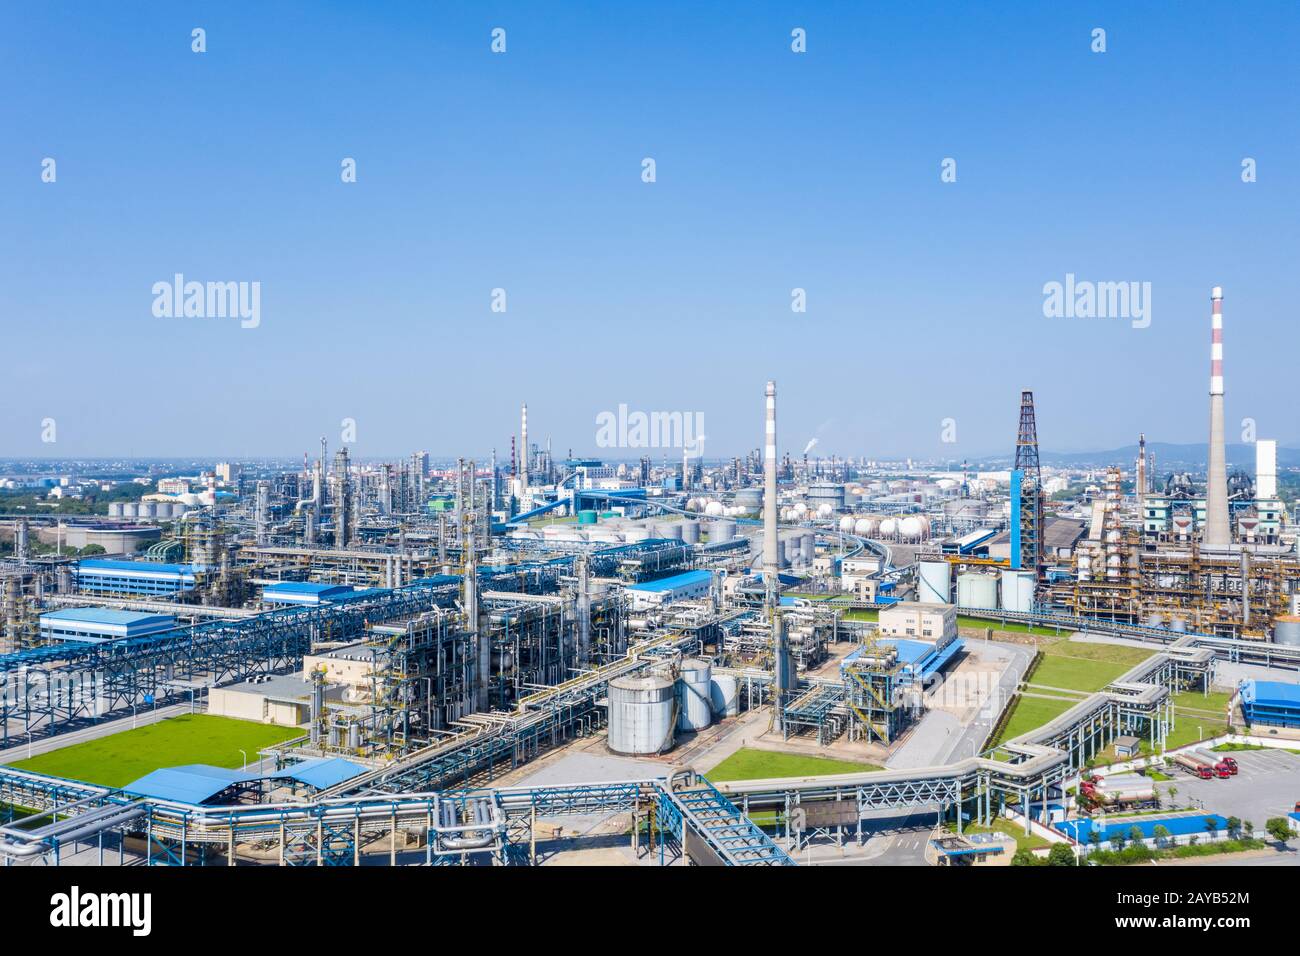 petrochemical oil refinery Stock Photo